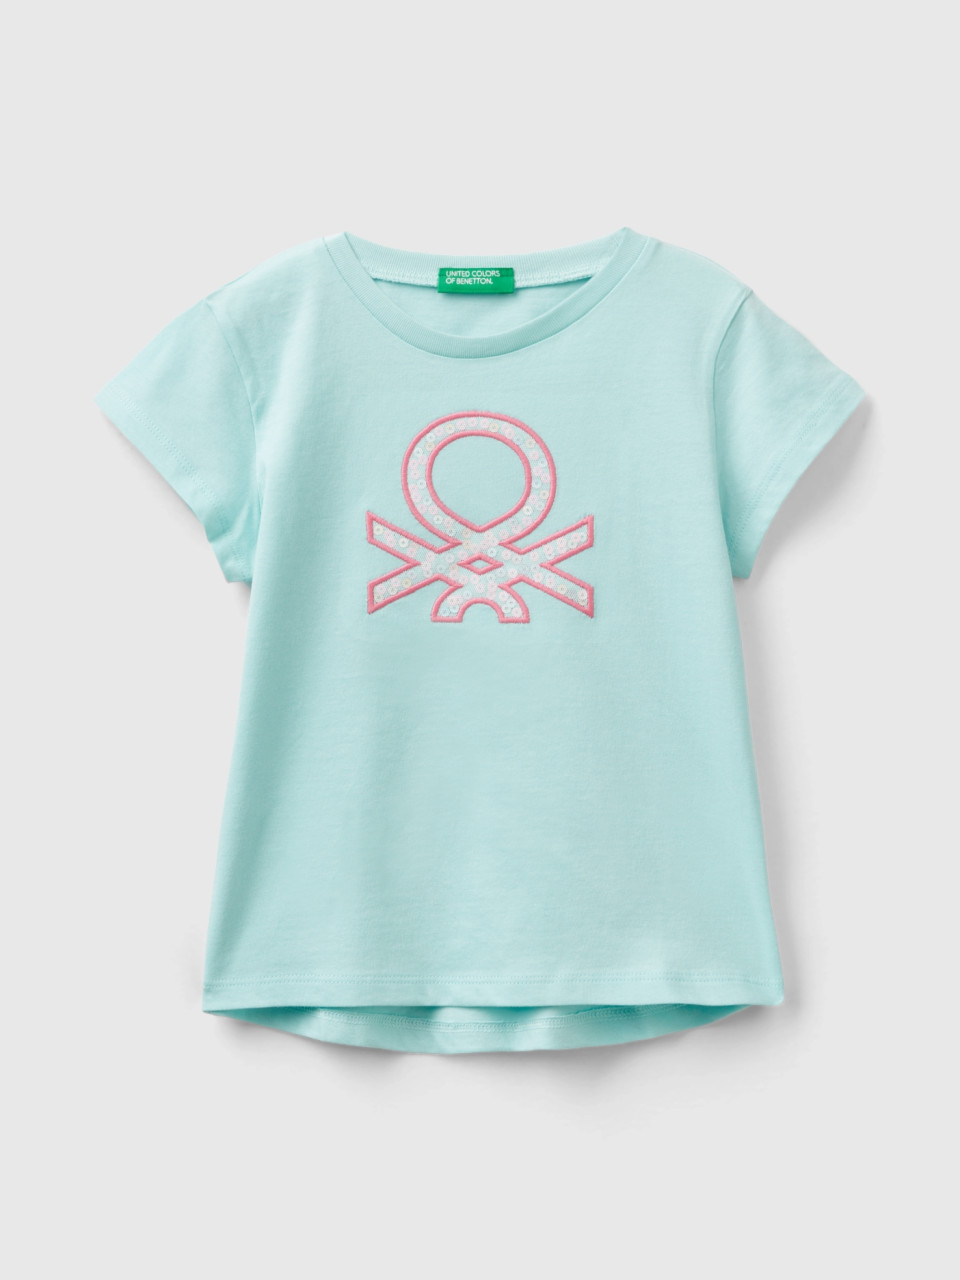 Benetton, T-shirt In Organic Cotton With Embroidered Logo, Aqua, Kids